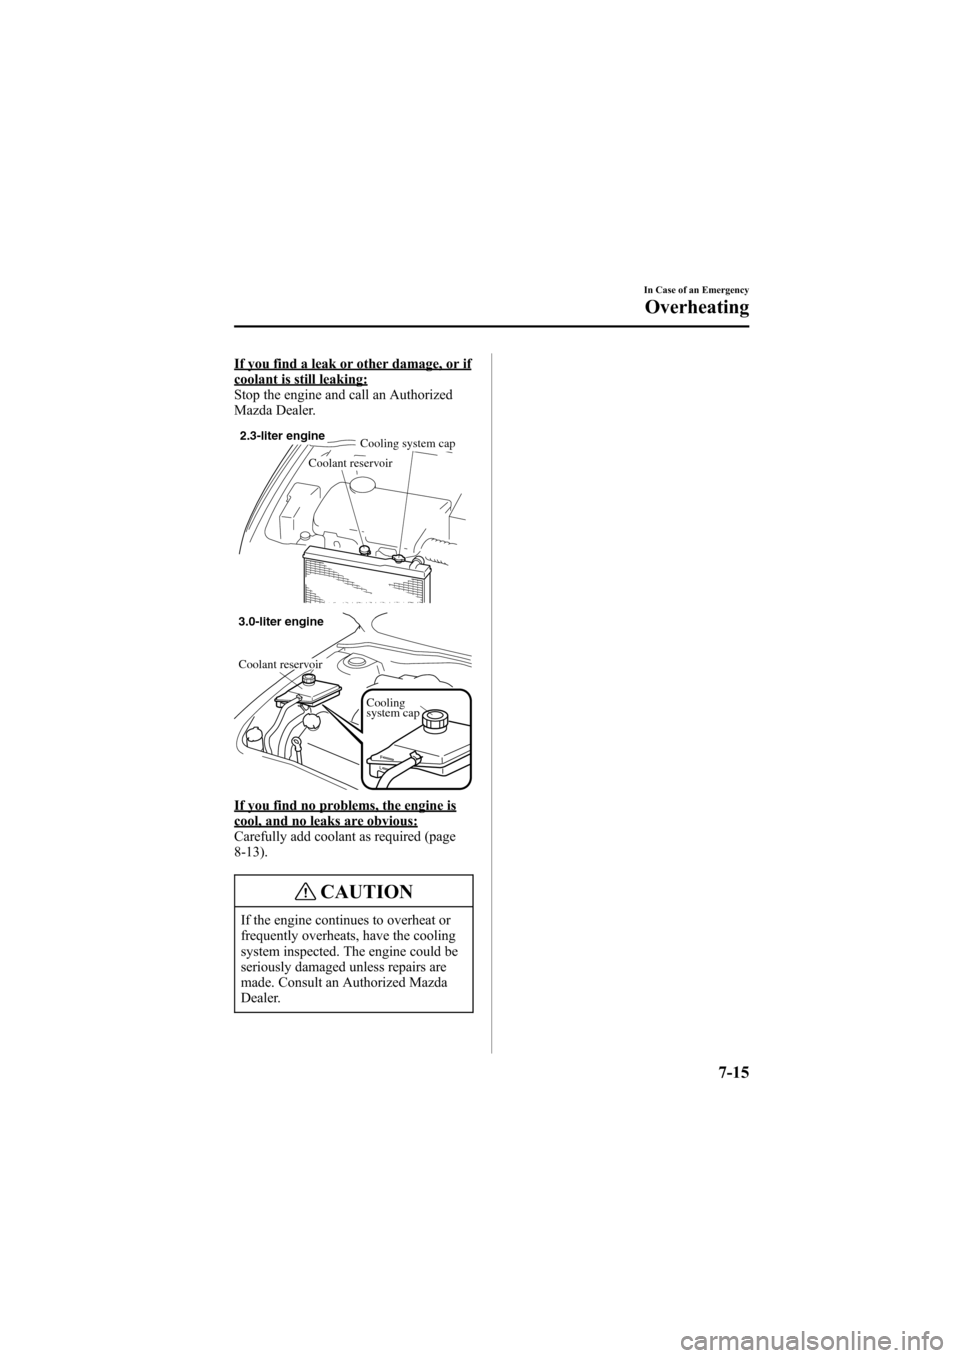 MAZDA MODEL 6 2005  Owners Manual (in English) Black plate (243,1)
If you find a leak or other damage, or ifcoolant is still leaking:
Stop the engine and call an Authorized
Mazda Dealer.
2.3-liter engine
Cooling system cap
Coolant reservoir
Coolin